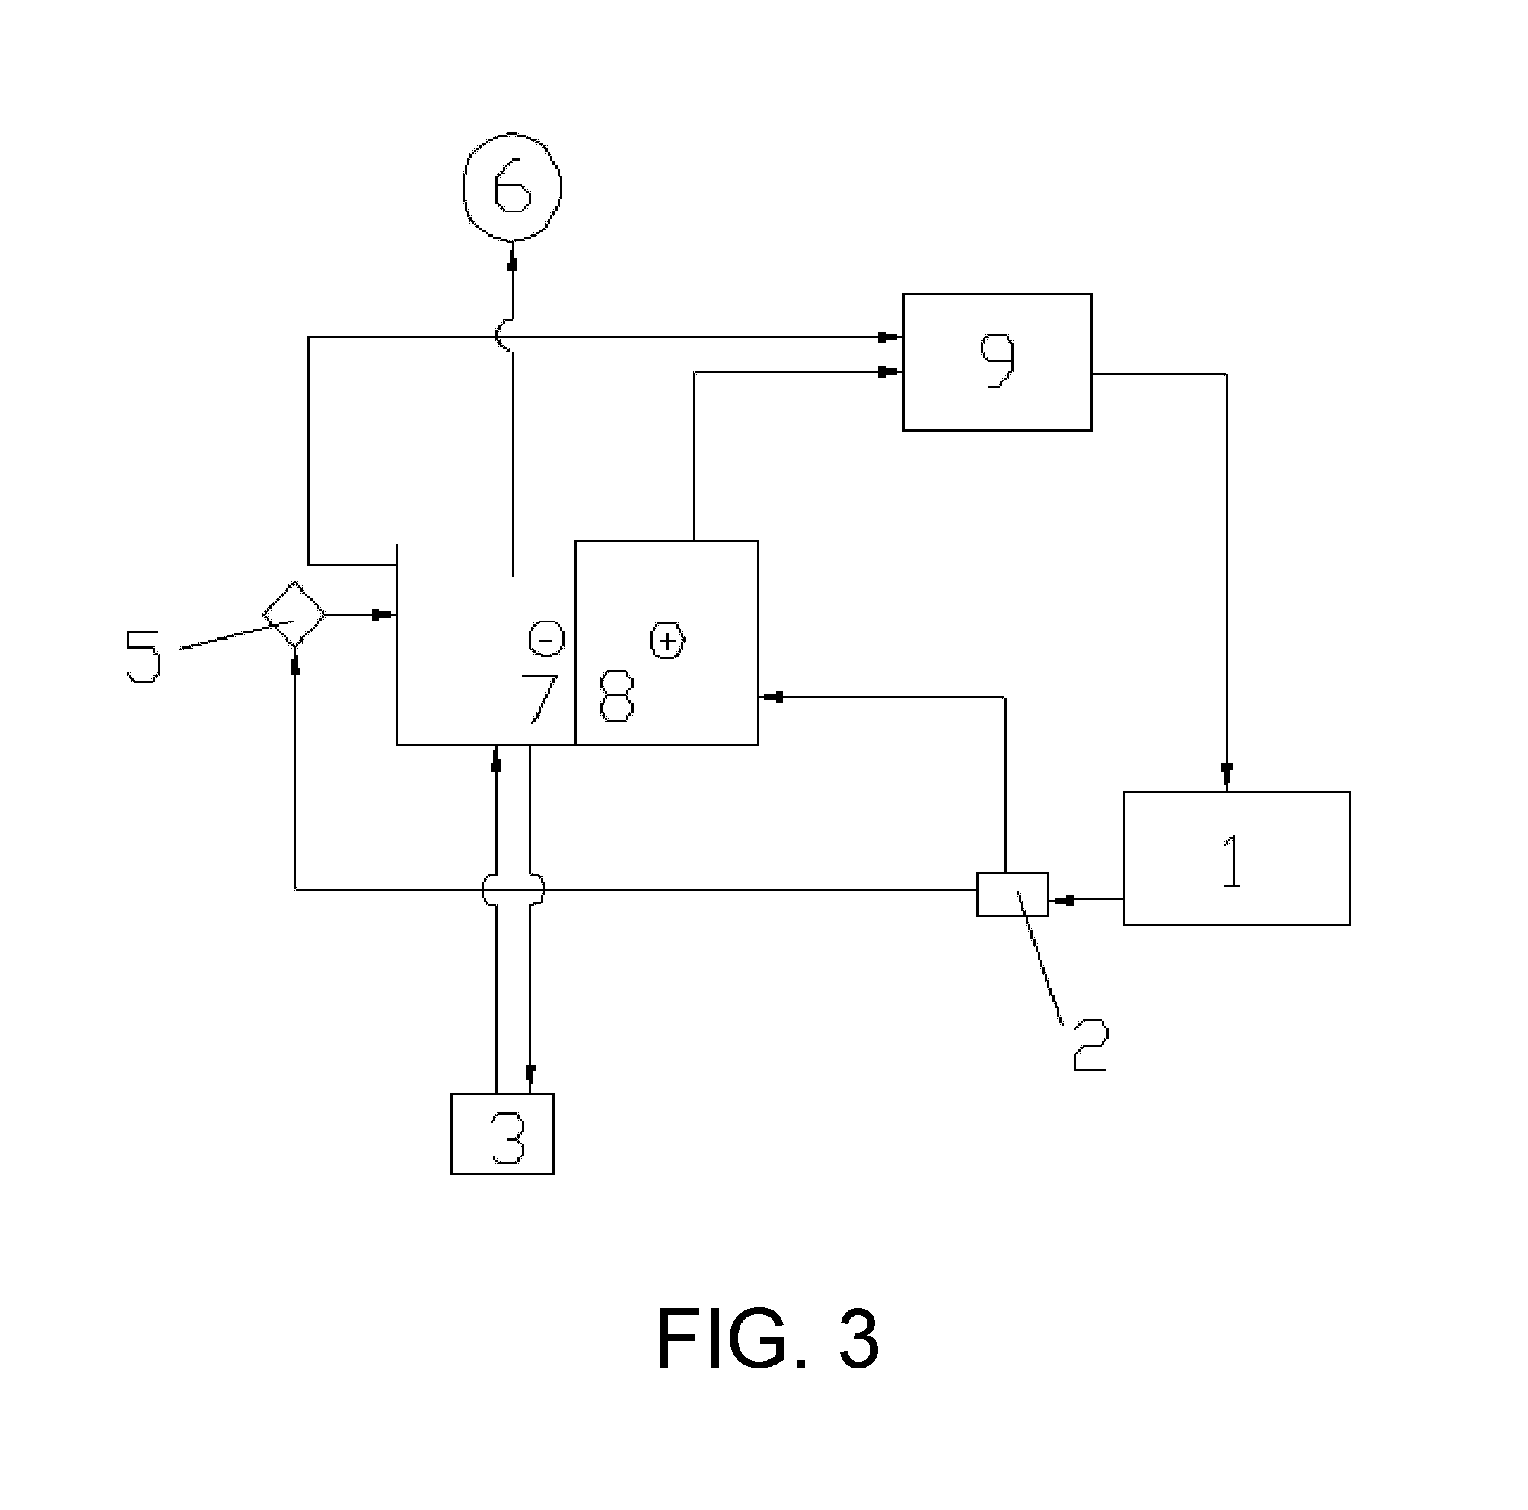 Method for electrolytic recycling and regenerating acidic cupric chloride etchants